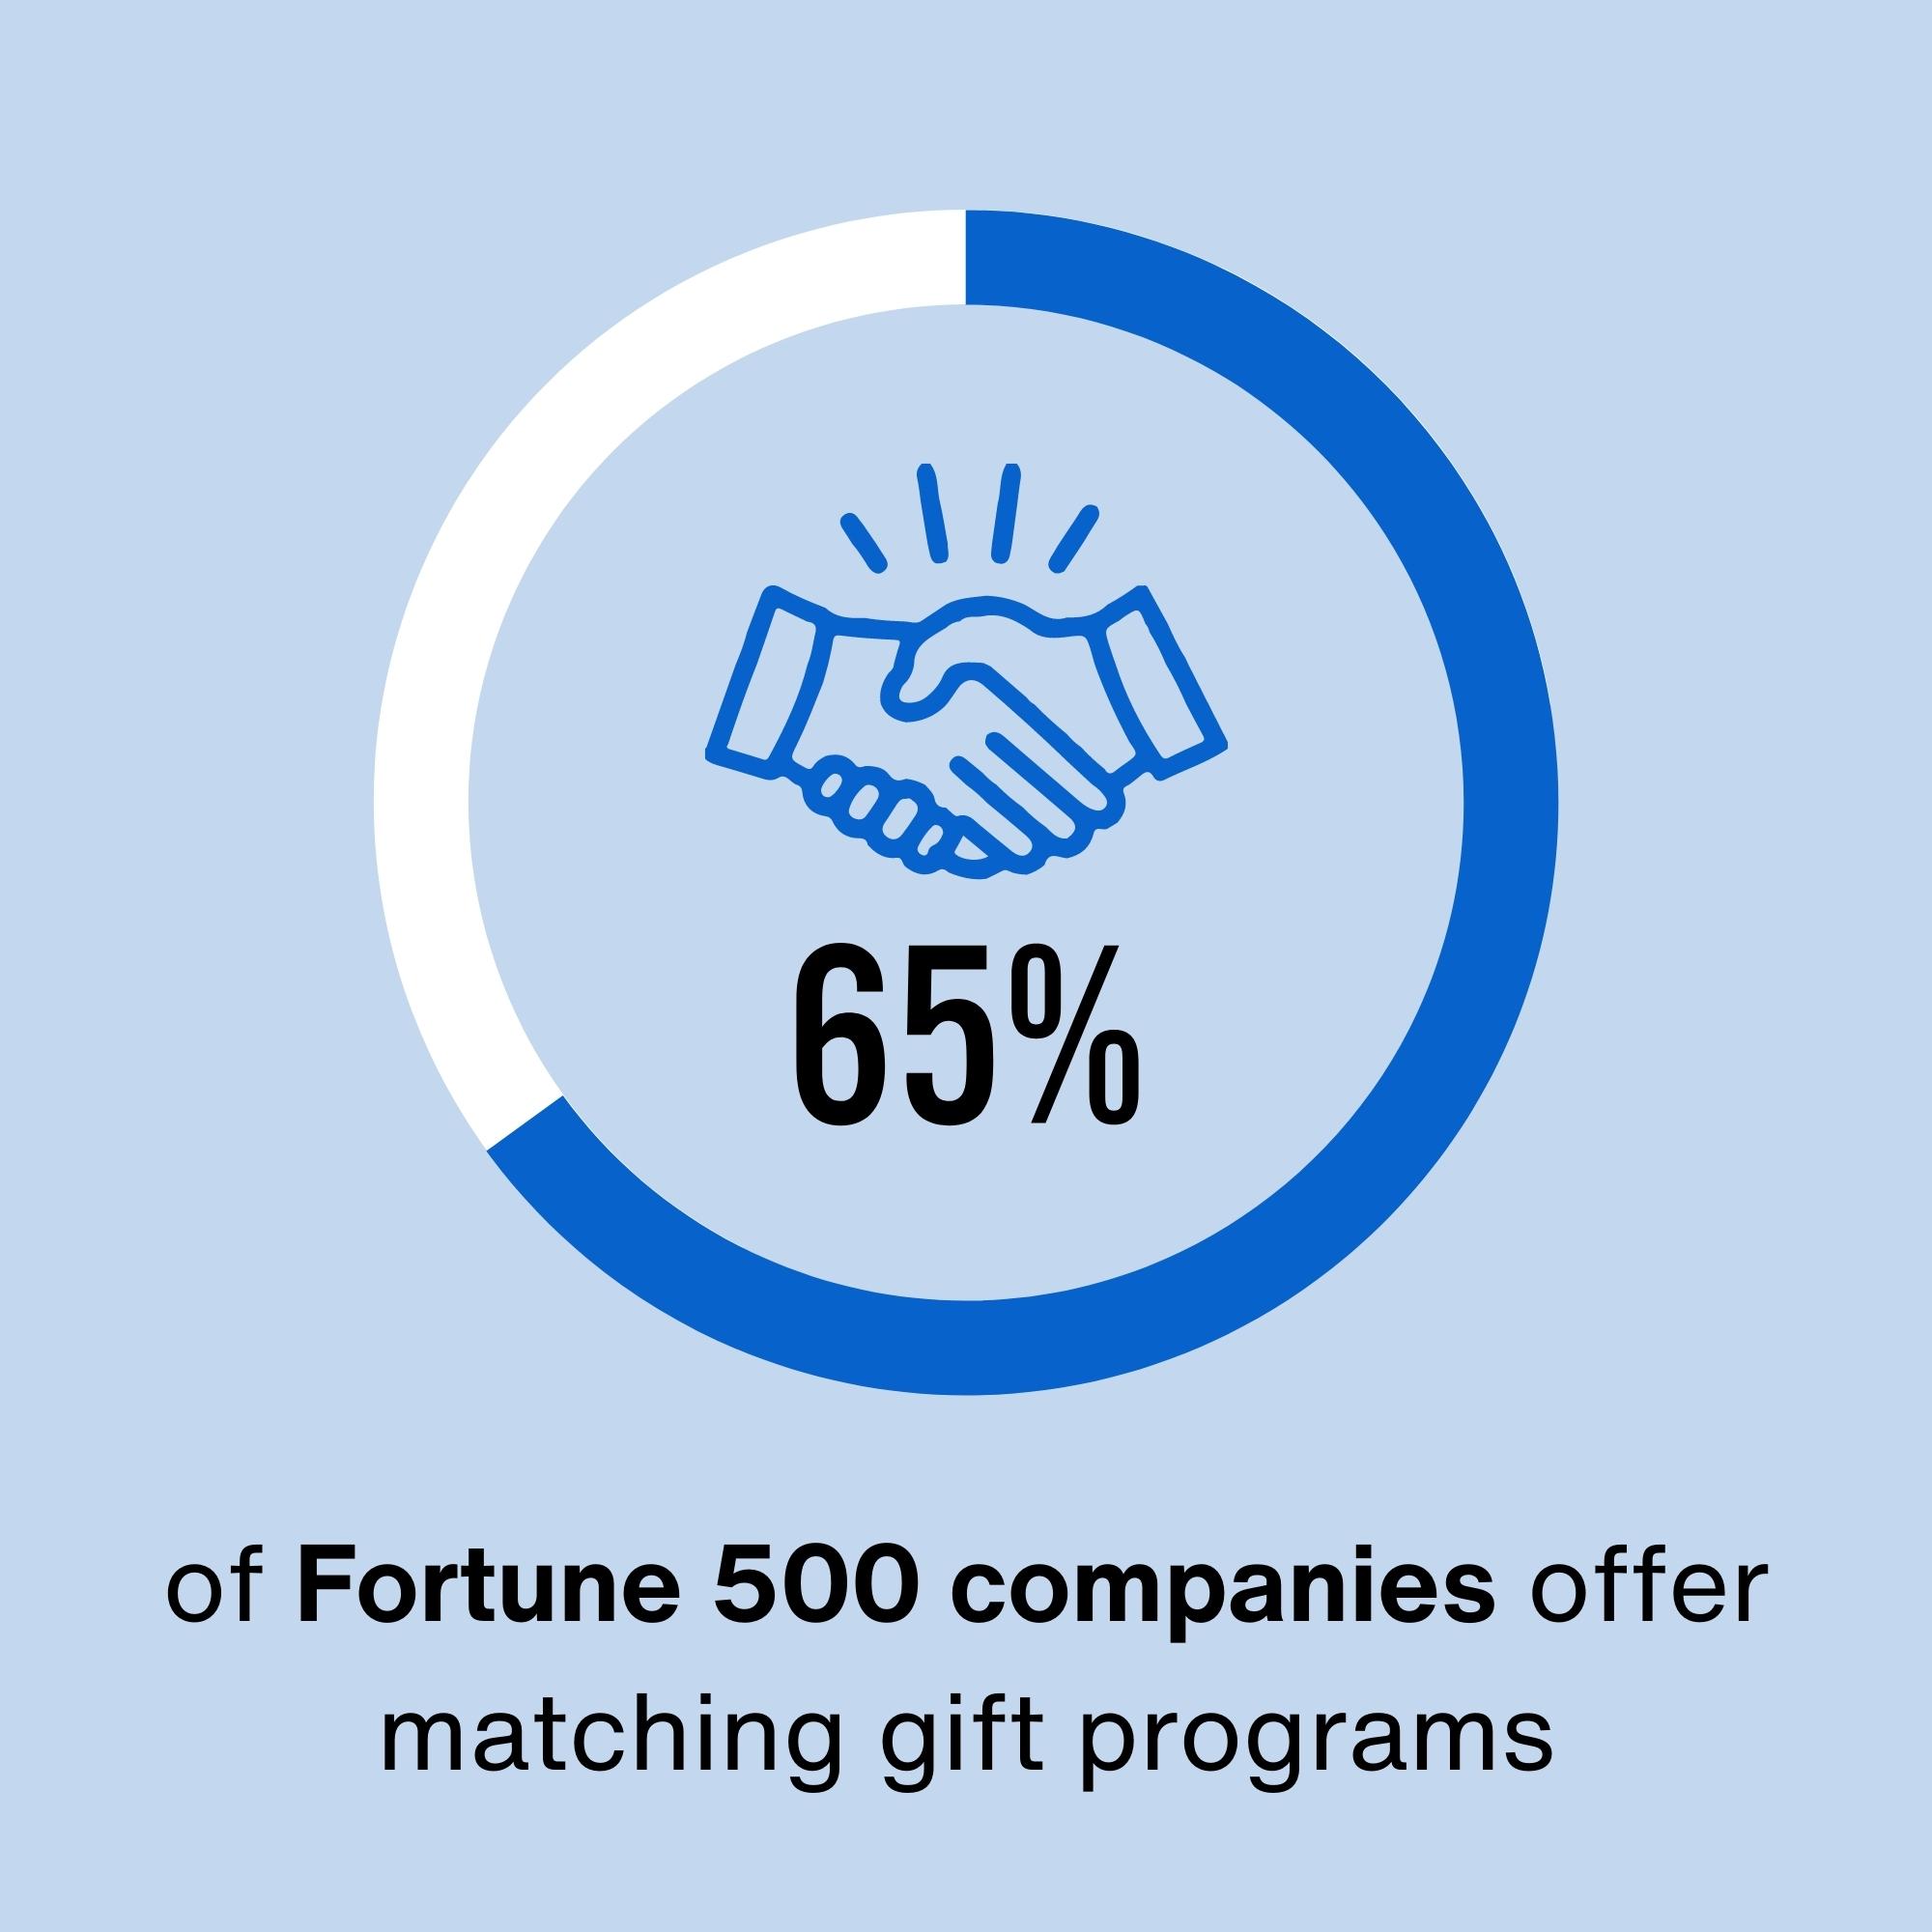 65% of Fortune 500 companies offer matching gift programs